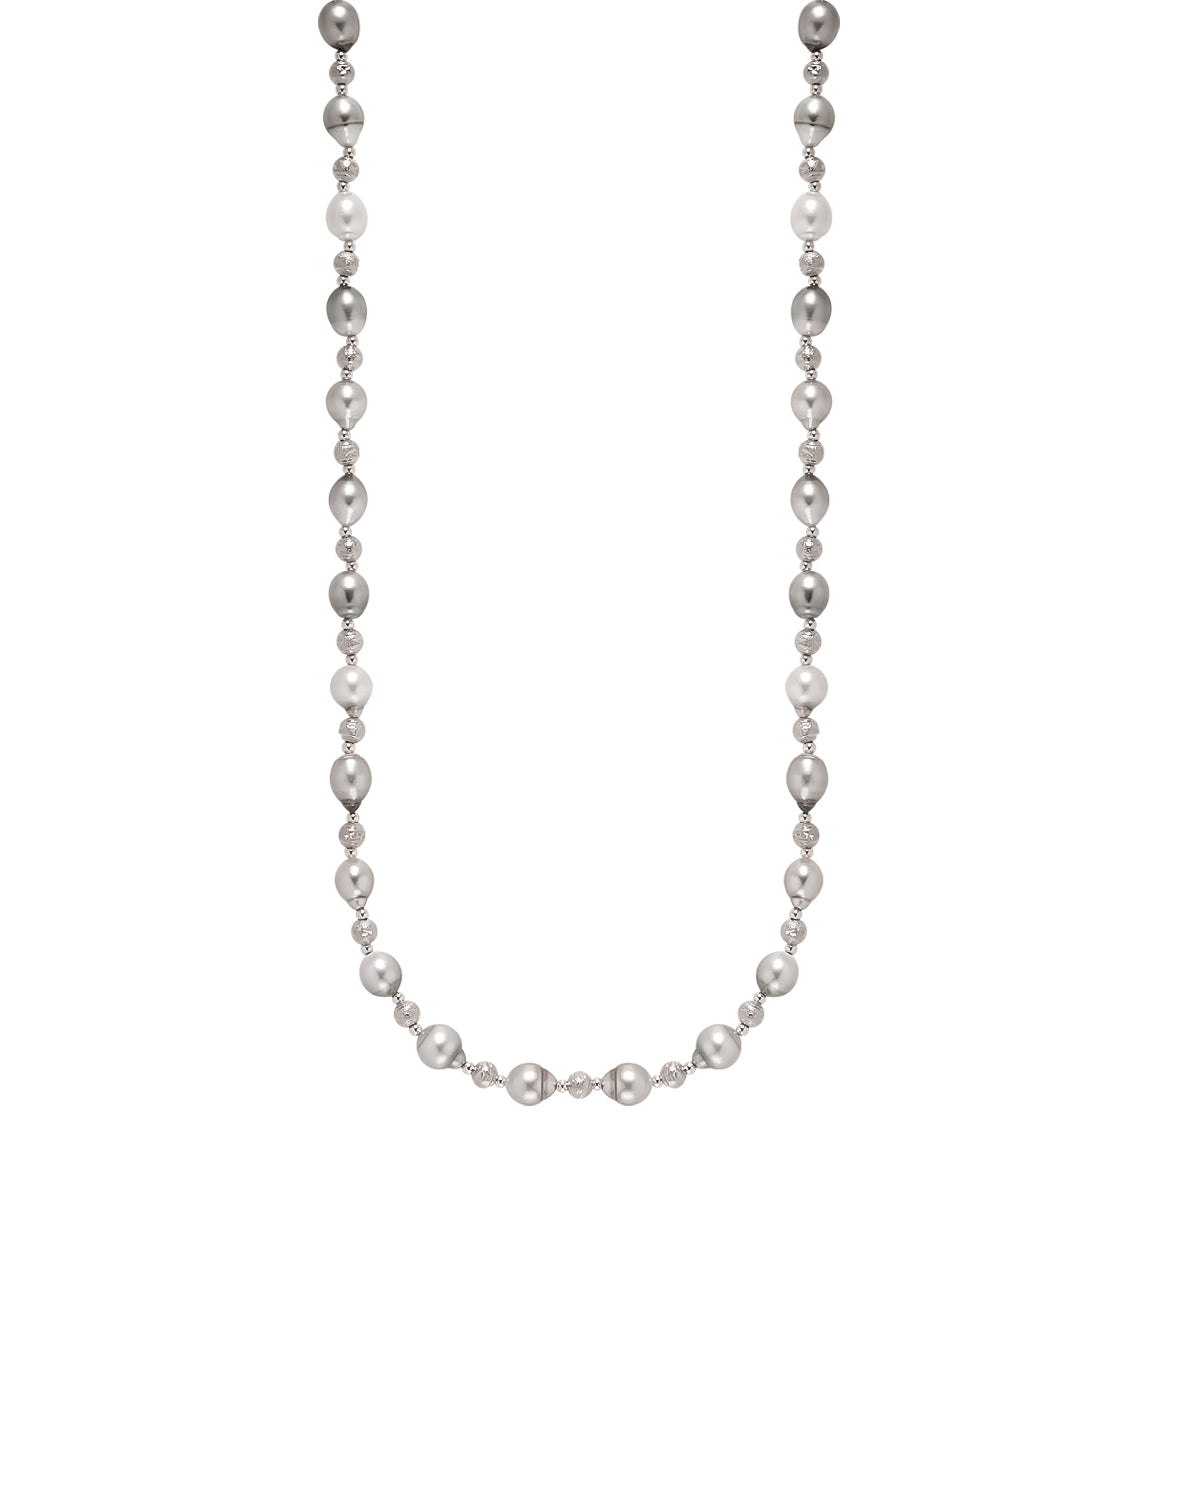 9.5-10mm Tahitian Baroque Pearl Necklace